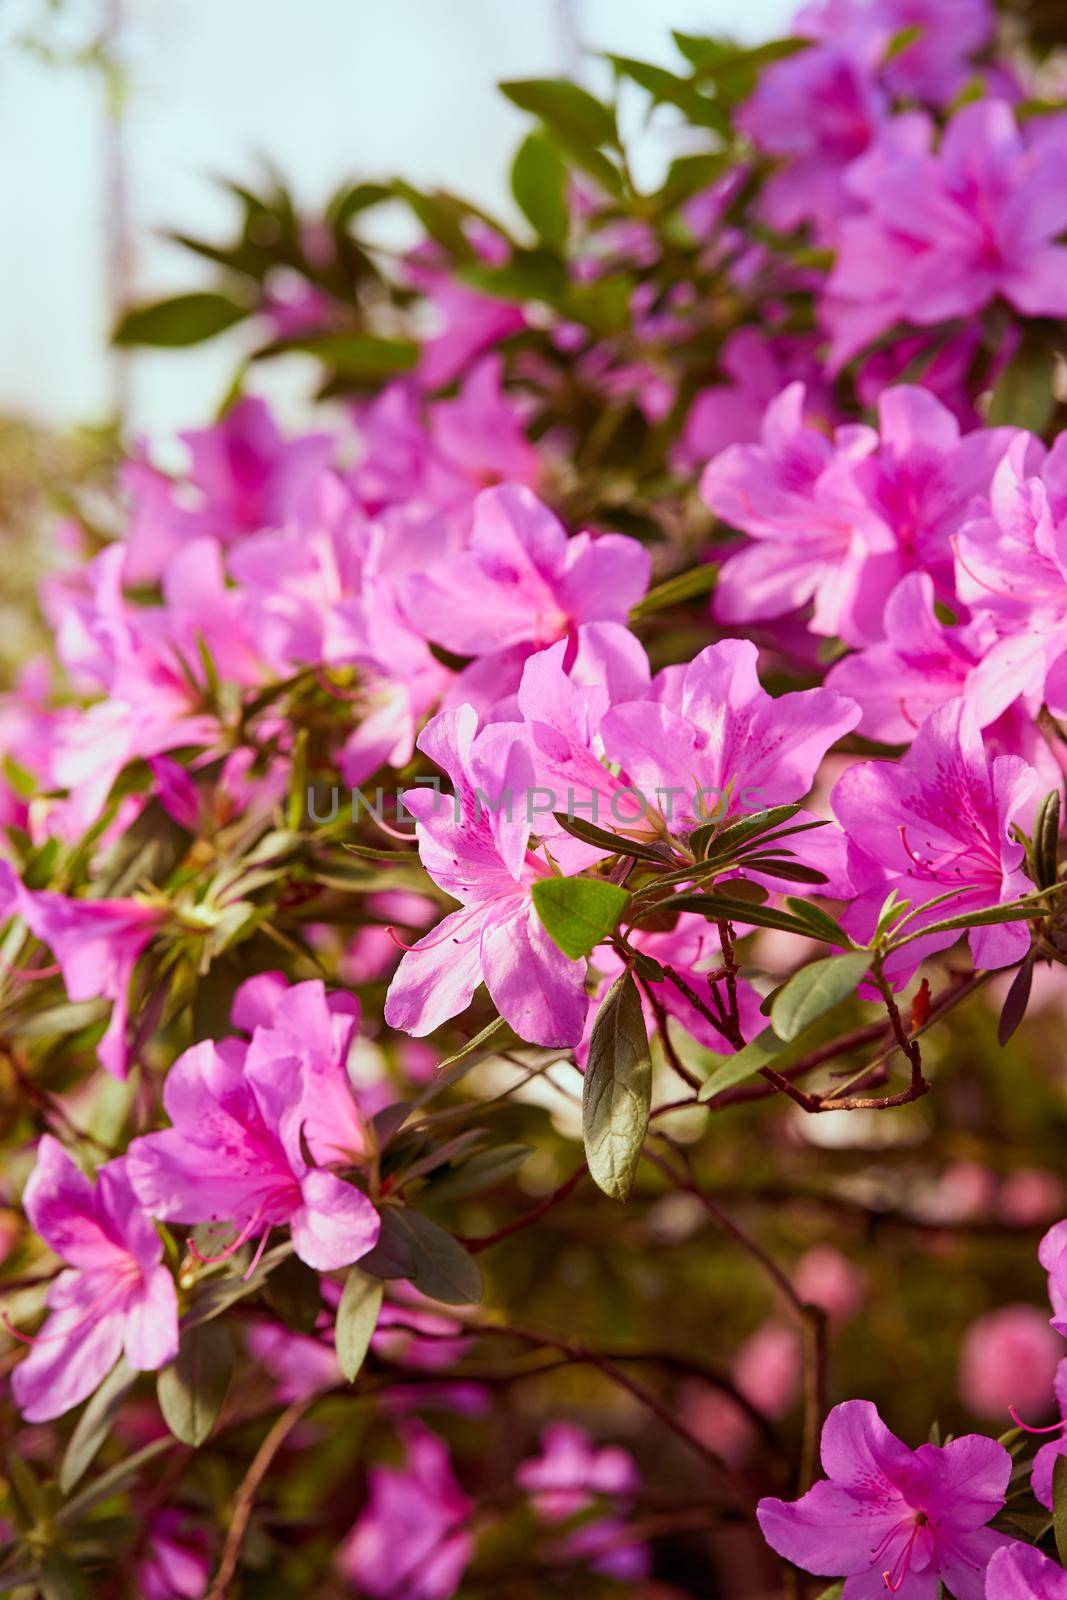 Flowers bloom azaleas, pink rhododendron buds on green background by NataBene